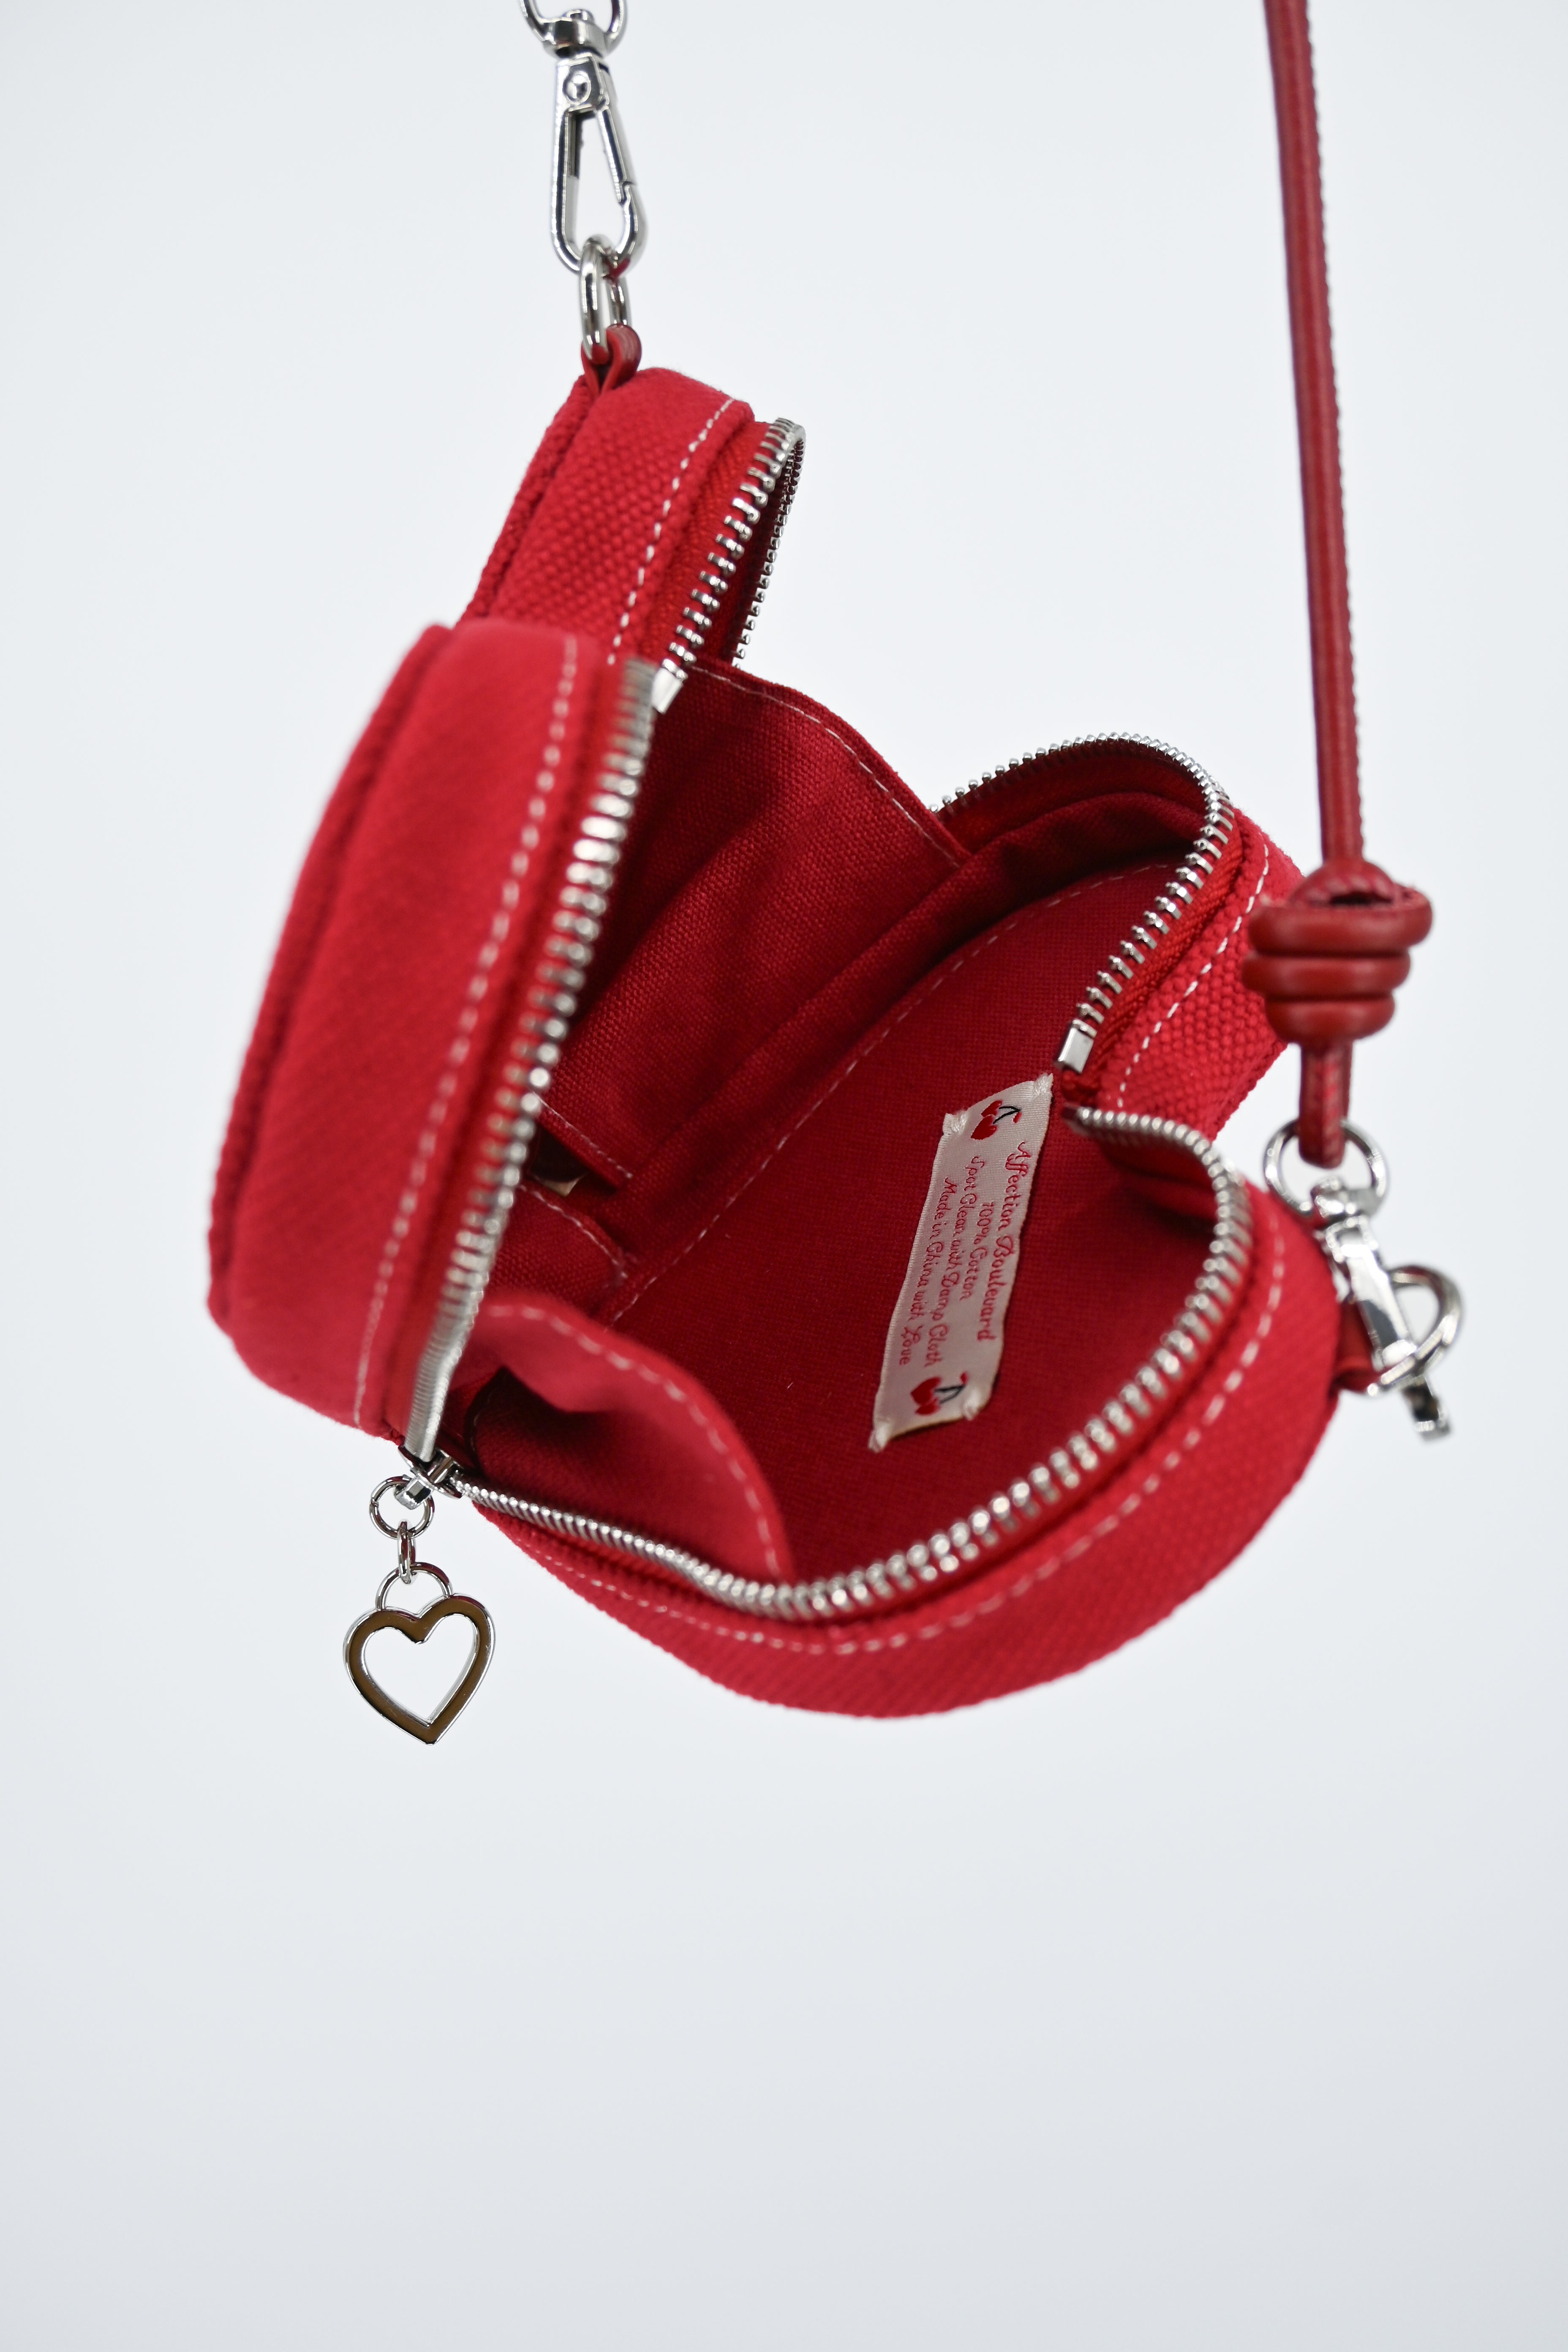 Heart Bag - The "Sweet Heart" (RED)